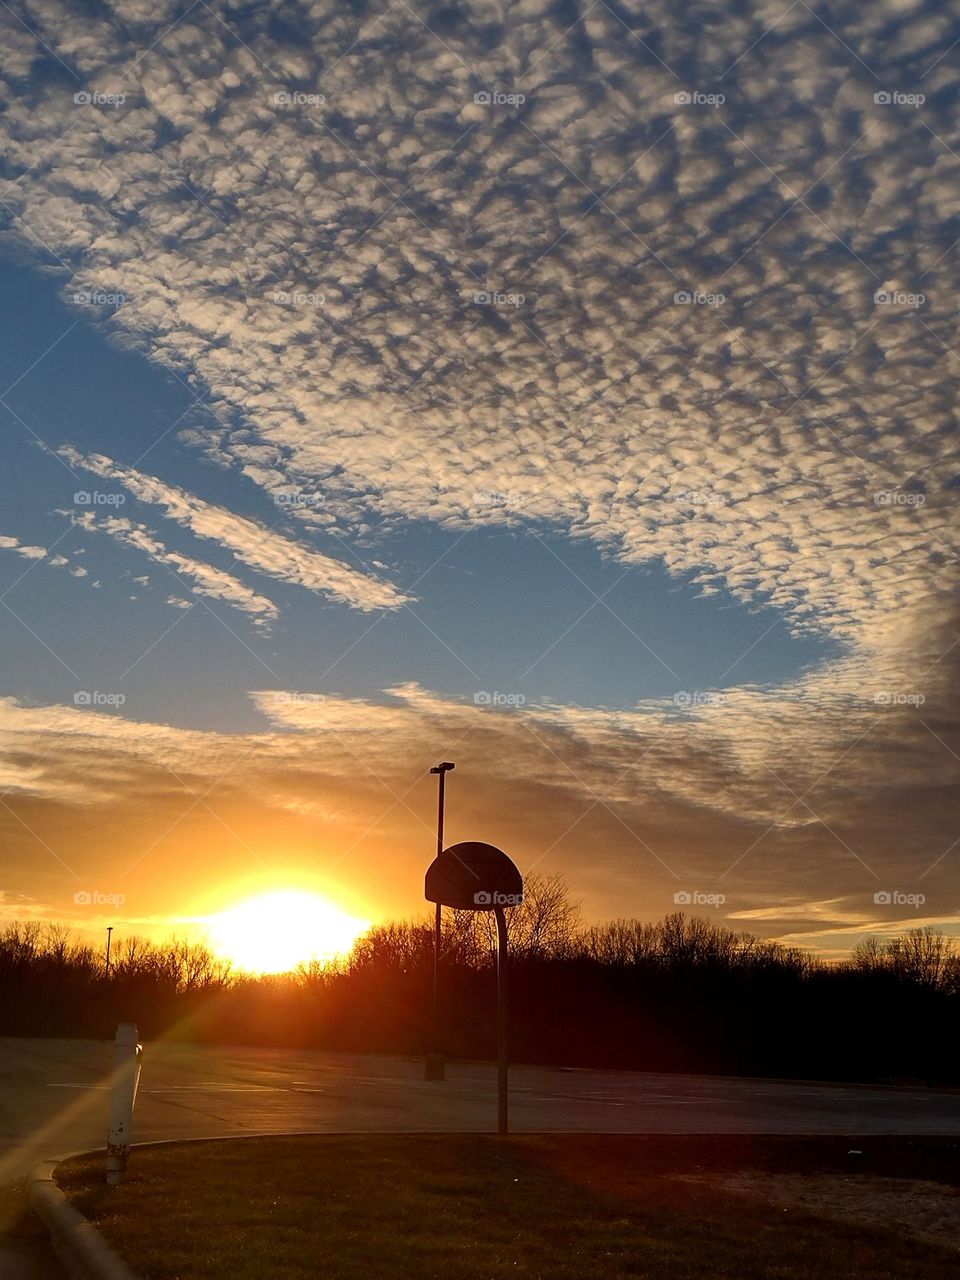 Unfiltered, beautiful, lovely sunset and clouds over a basketball court